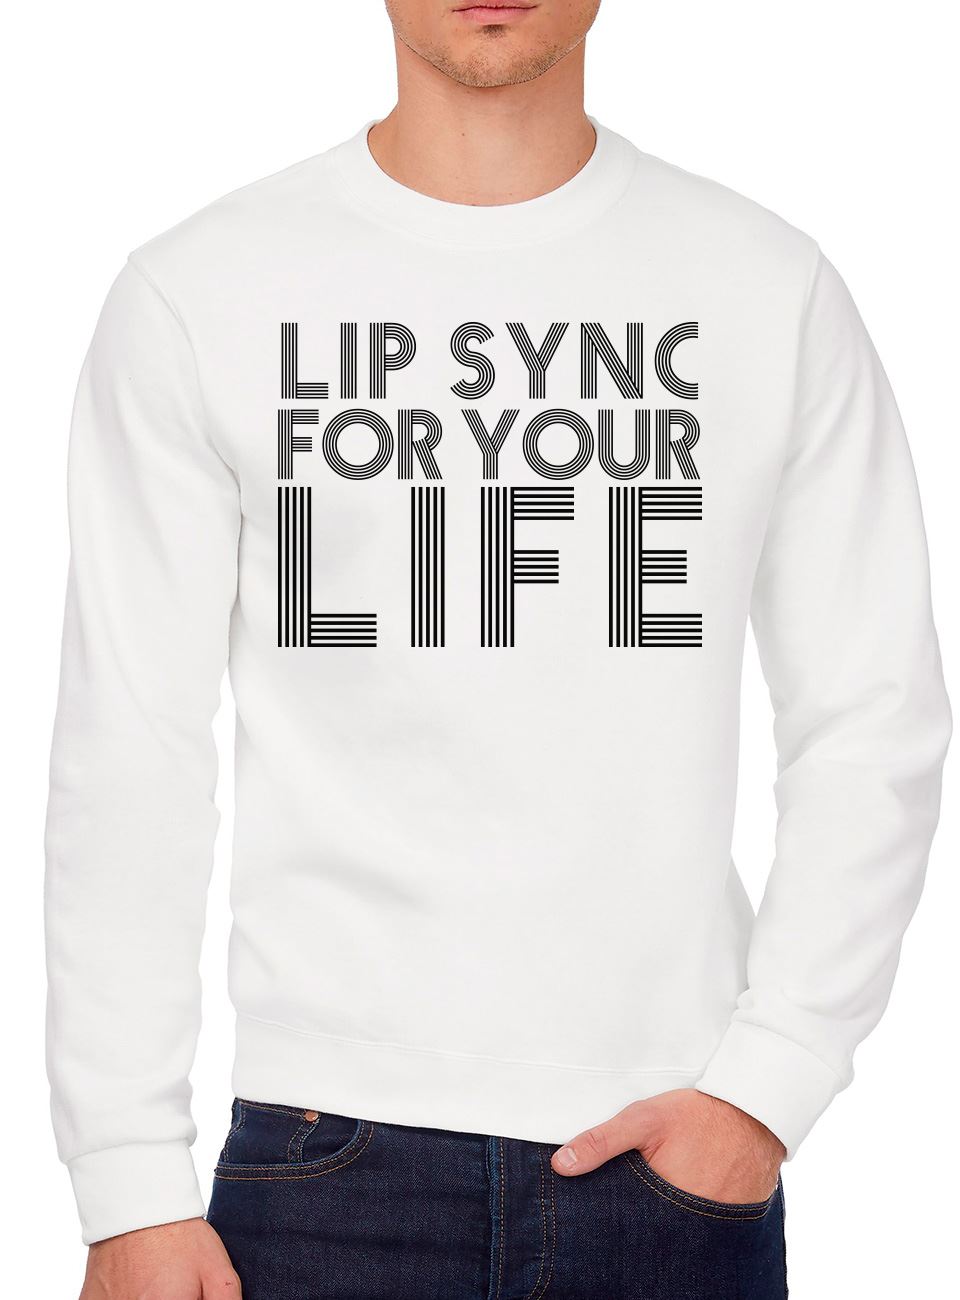 Lip Sync For Your Life - Youth & Mens Sweatshirt